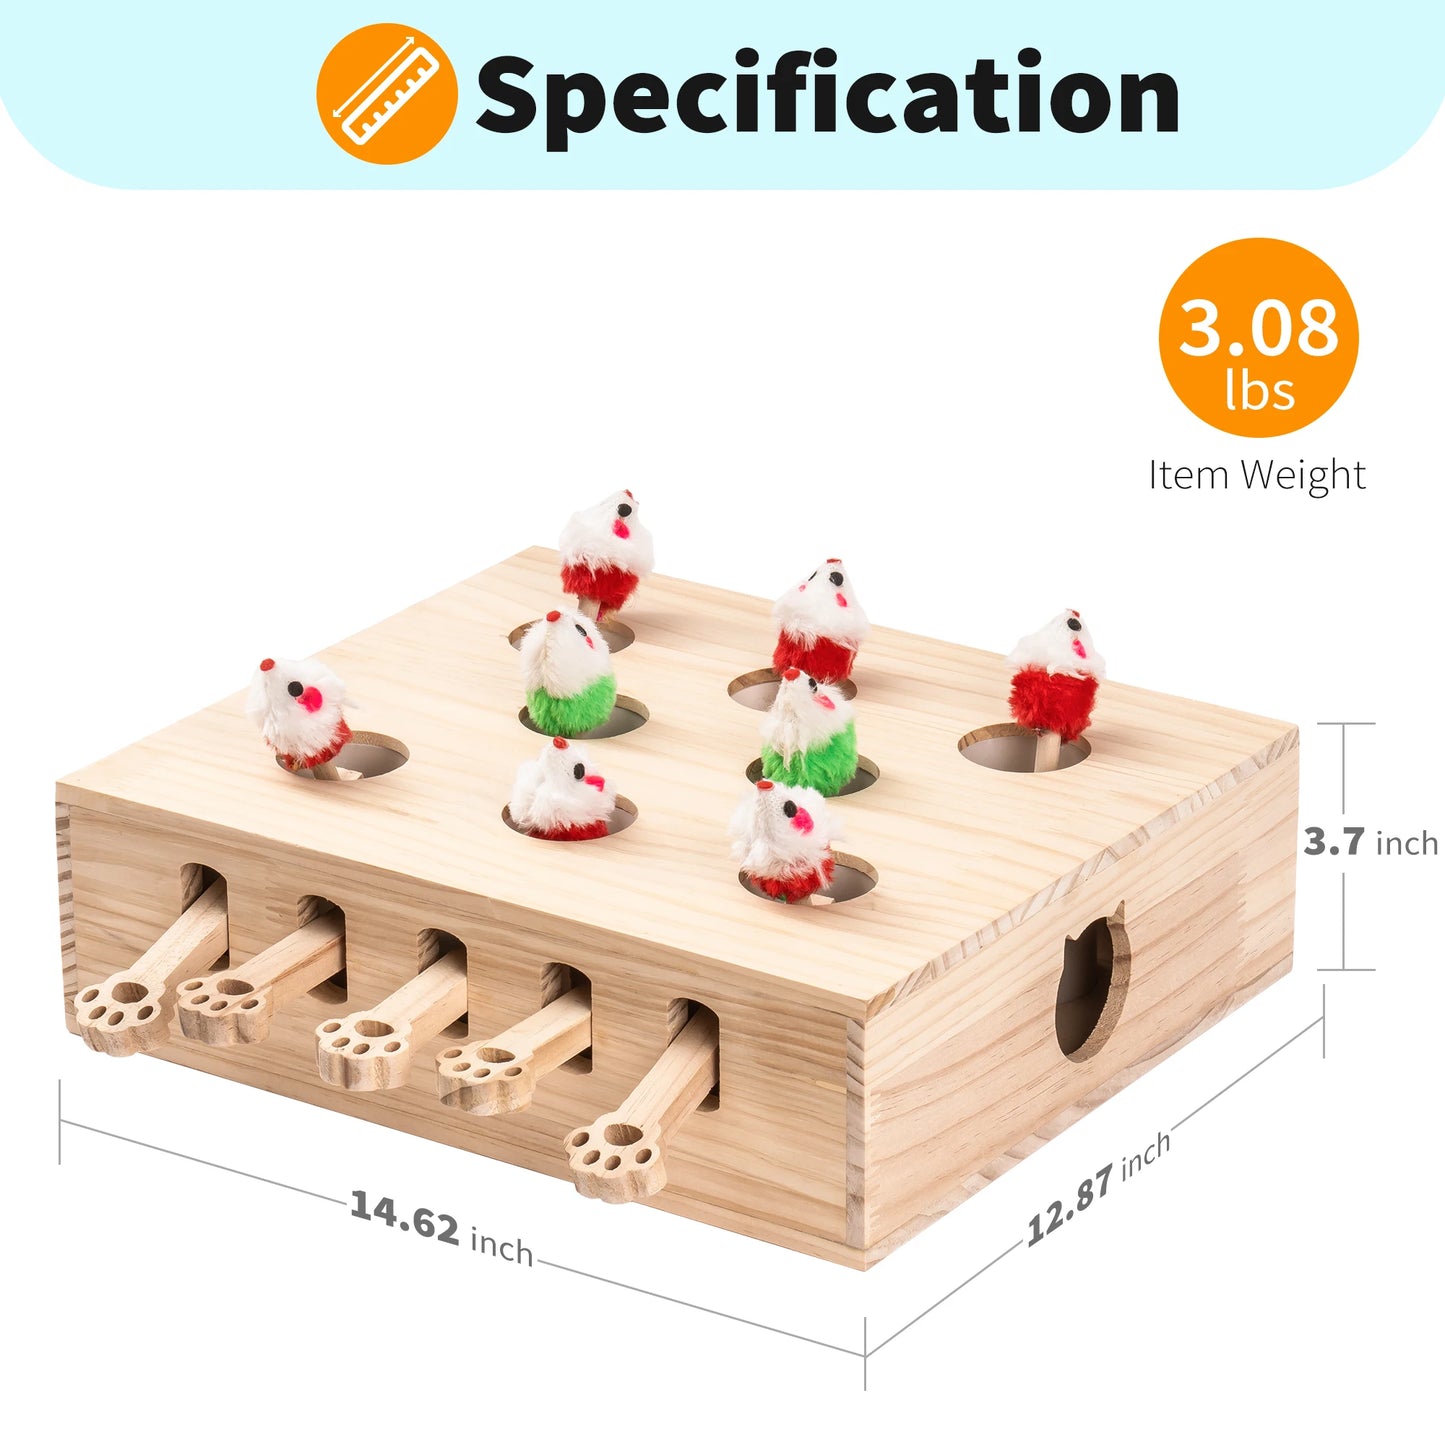 Interactive Solid Wood Whack-a-mole Toy for Cats